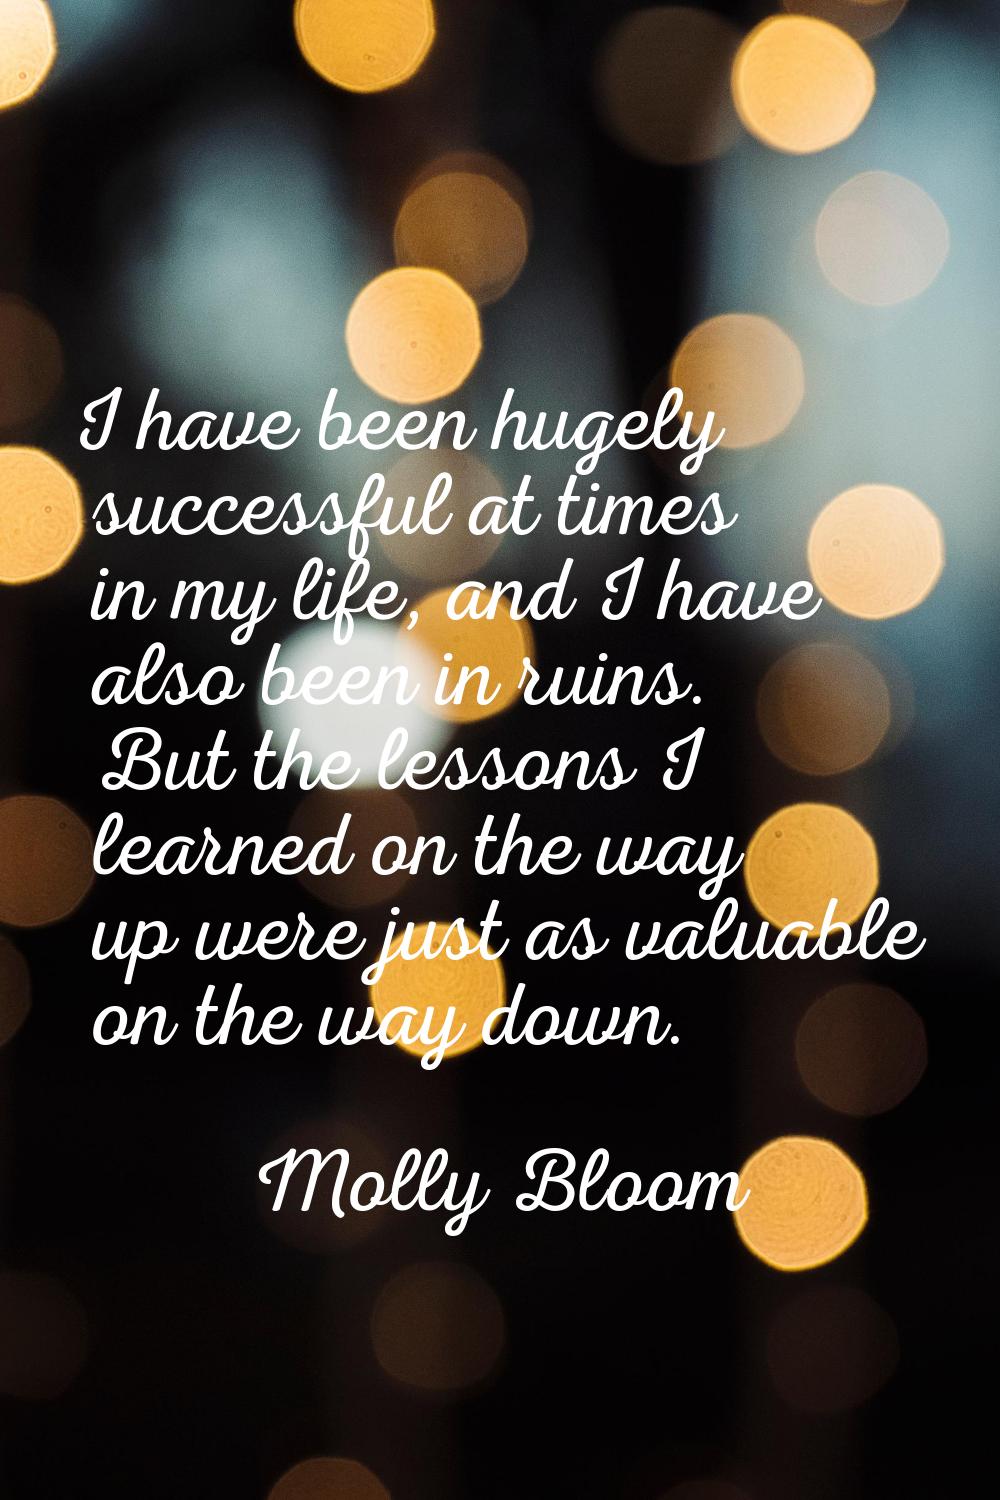 I have been hugely successful at times in my life, and I have also been in ruins. But the lessons I